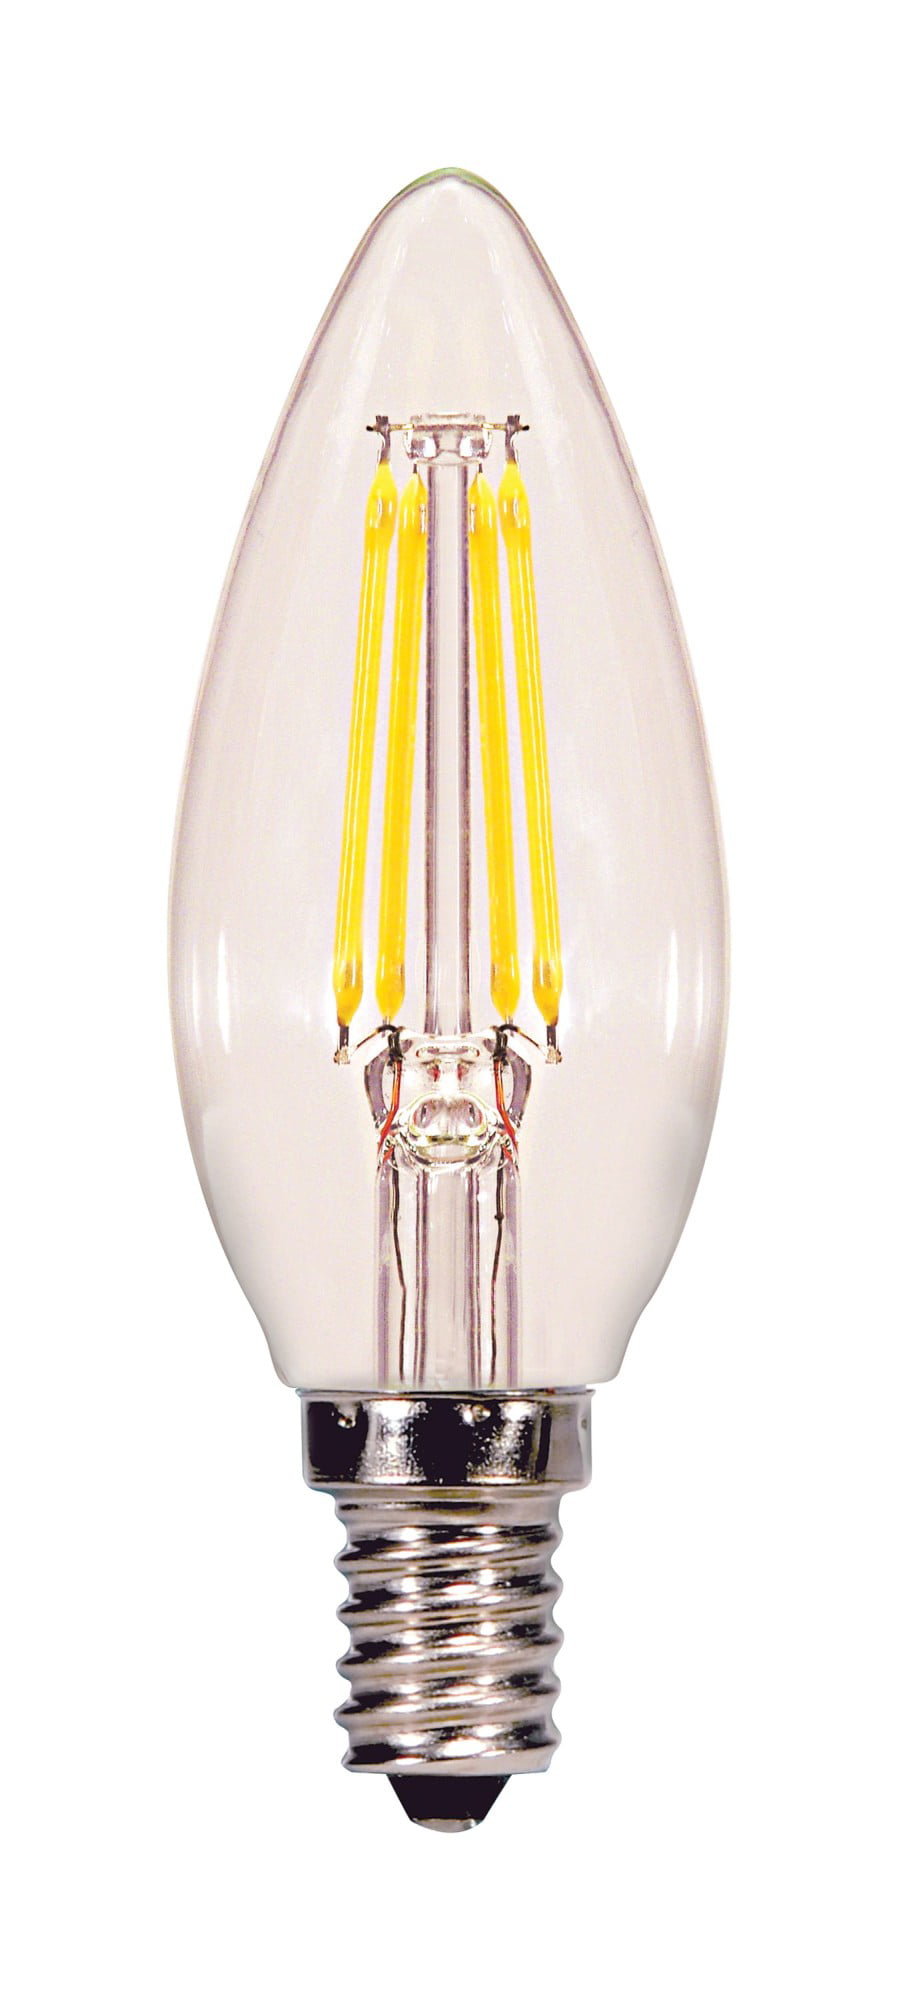 Satco 40W Frosted Flame Tip Decorative Lamp Light Bulb Medium Base E26 25-Pack 